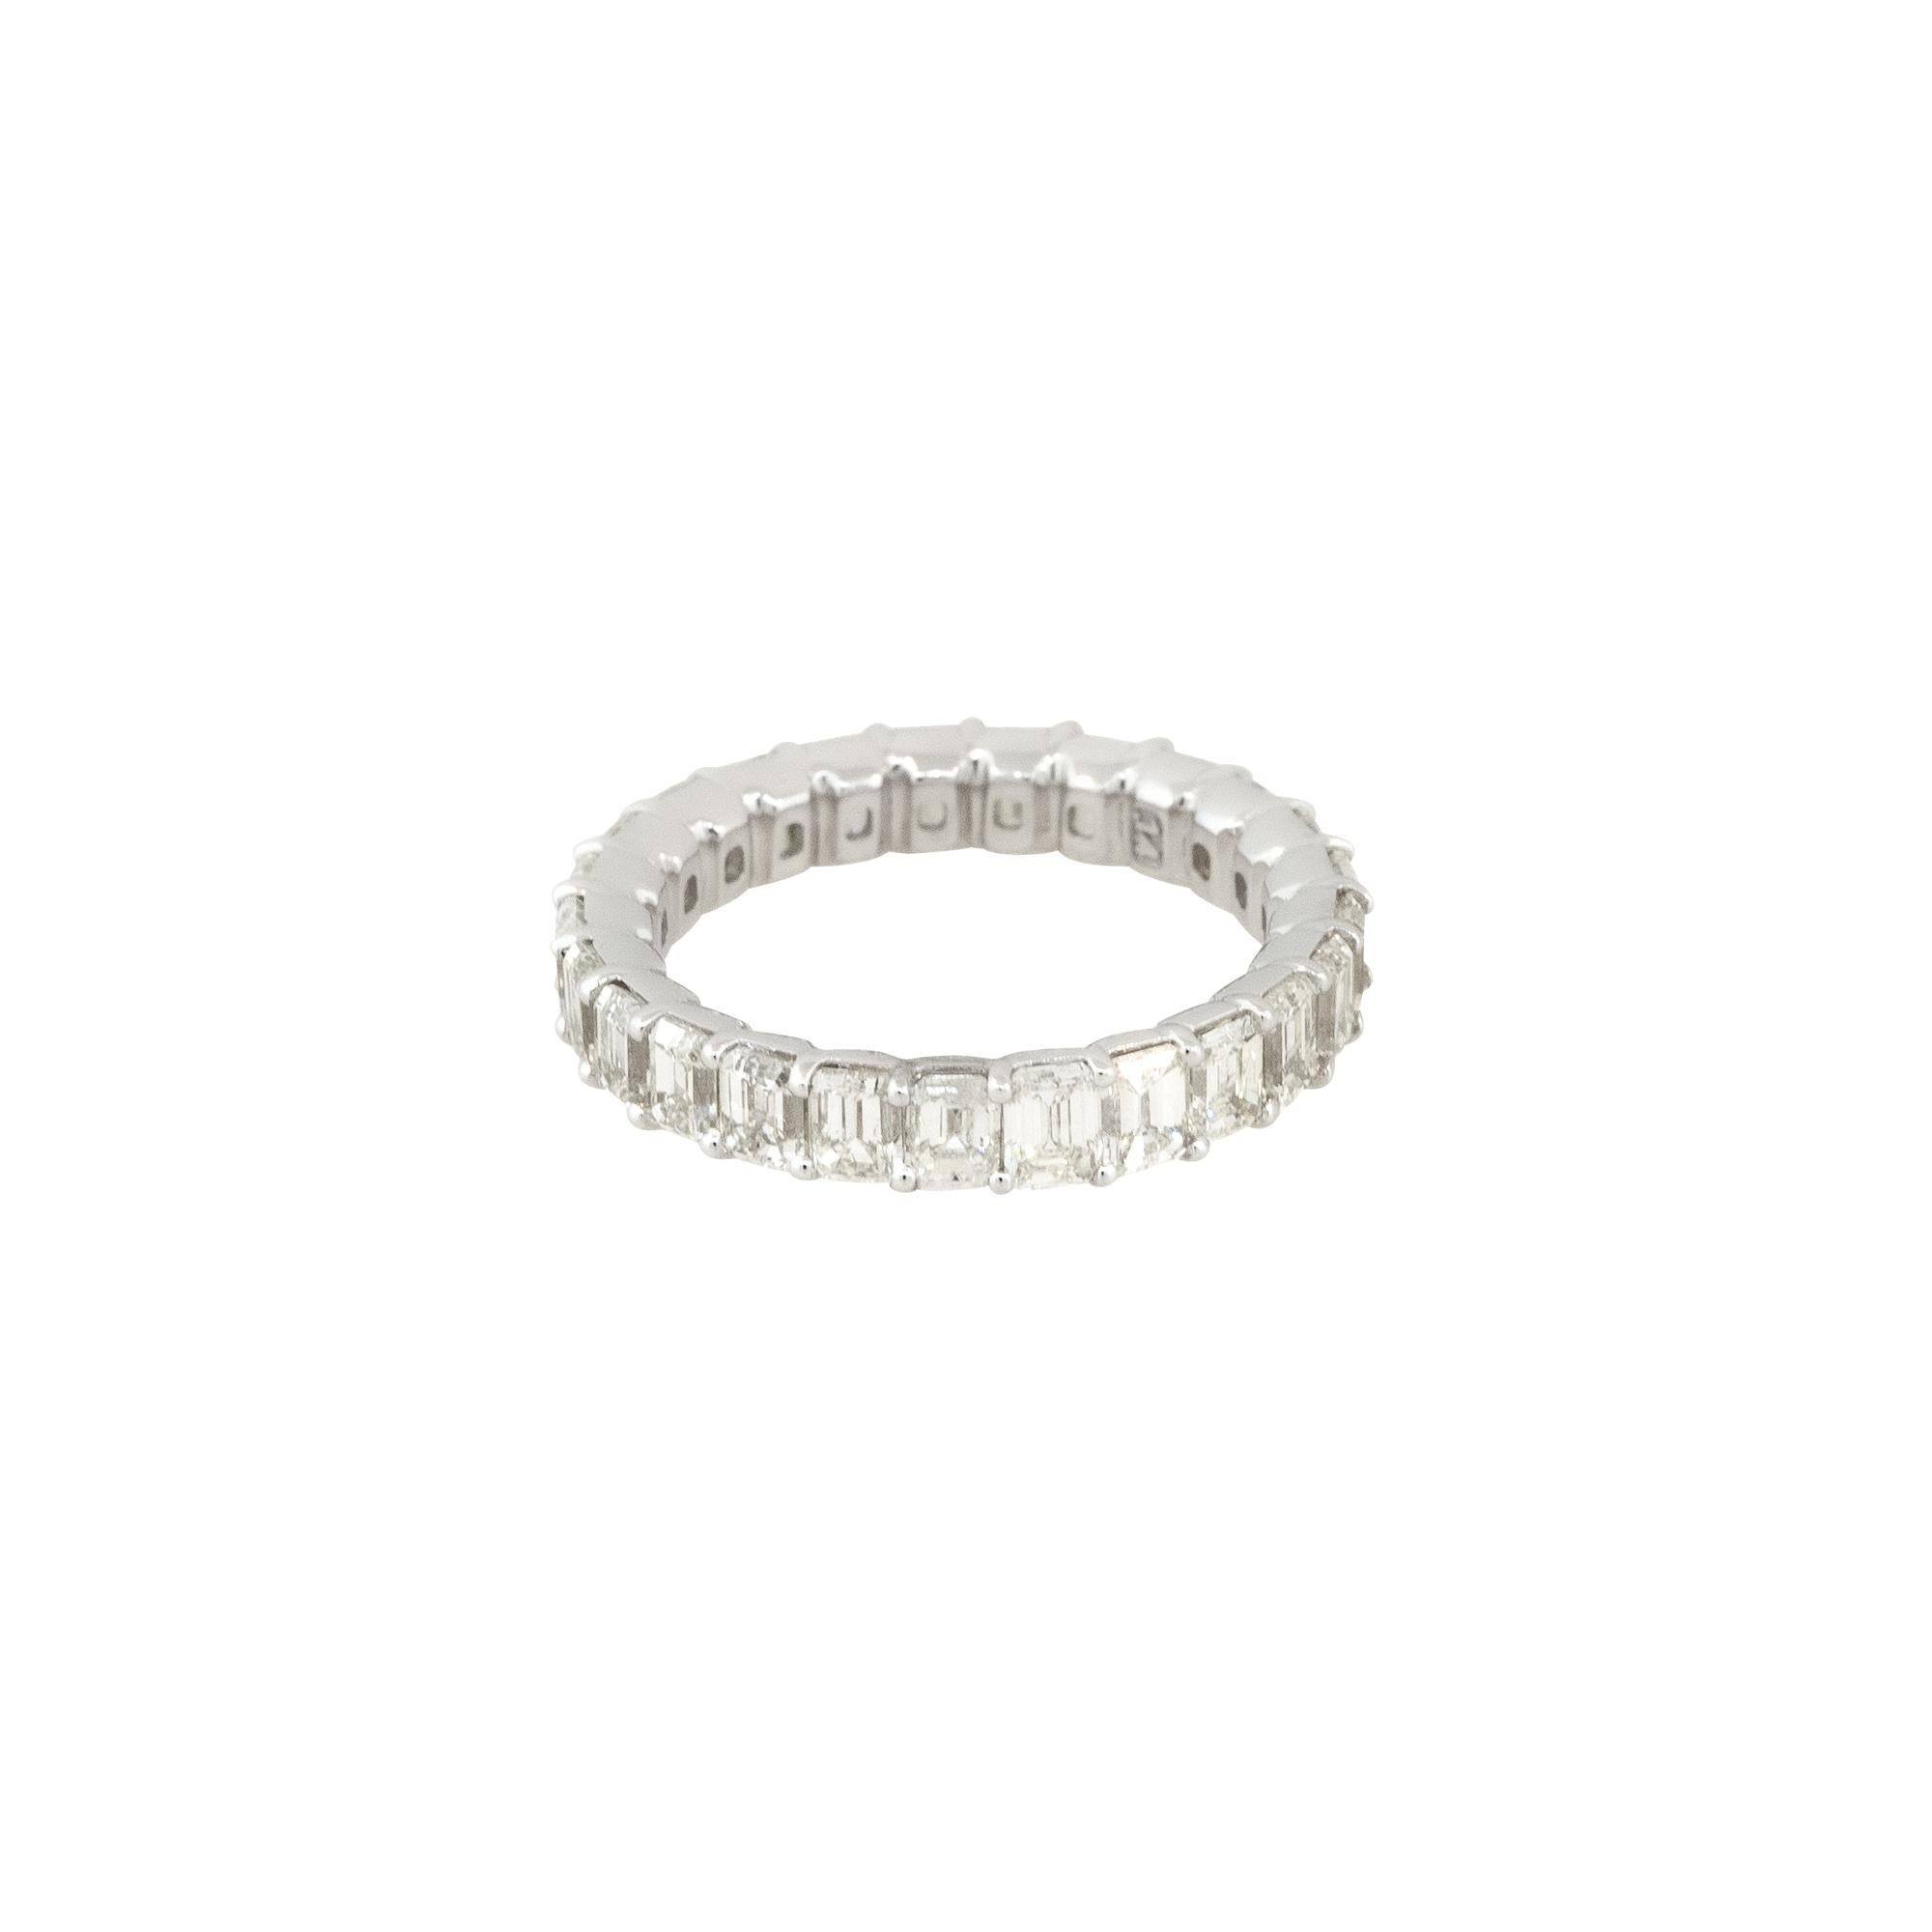 18k White Gold 4.53ctw Emerald Cut Diamond Eternity Band
Style: Women's Diamond Eternity Band
Material: 18k White Gold
Main Diamond Details: Approximately 4.53ctw of Emerald Cut Diamonds. Diamonds are prong set and there are 25 Diamonds in total.